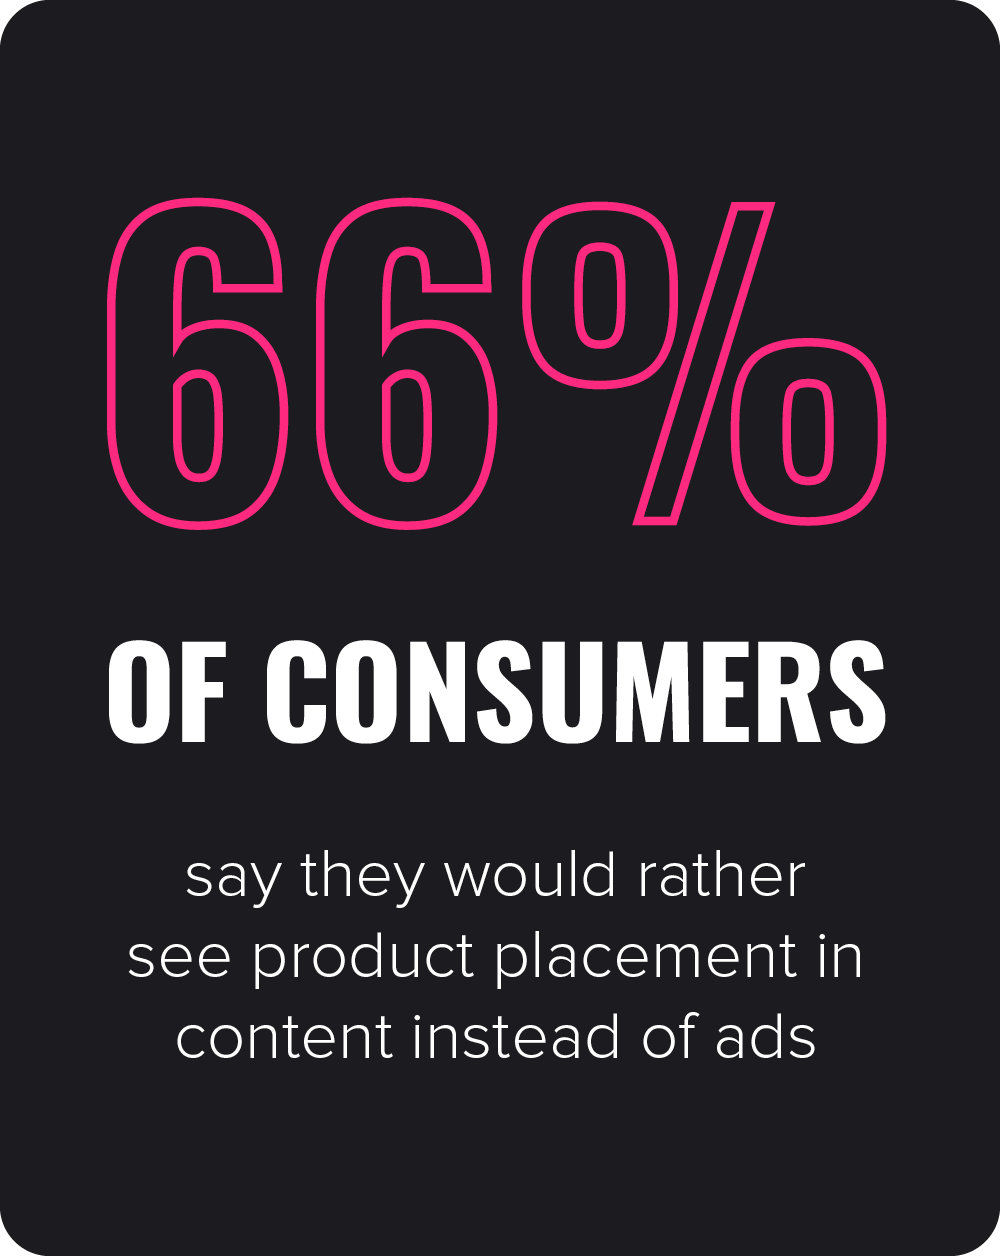 66% of consumers say they would prefer to see placements over ads